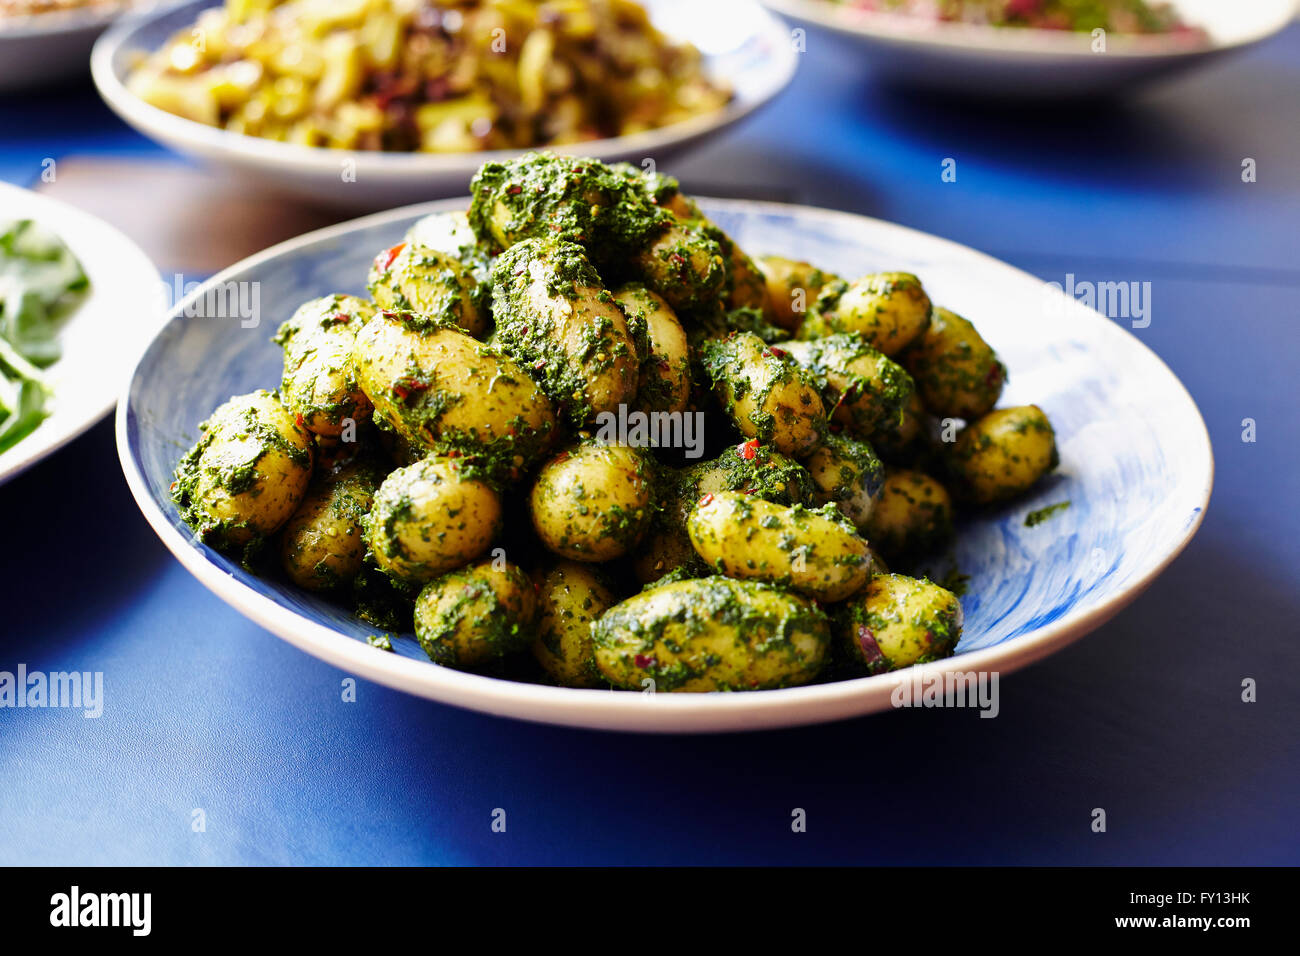 Close-up of prepared potatoes served in plate at table Stock Photo